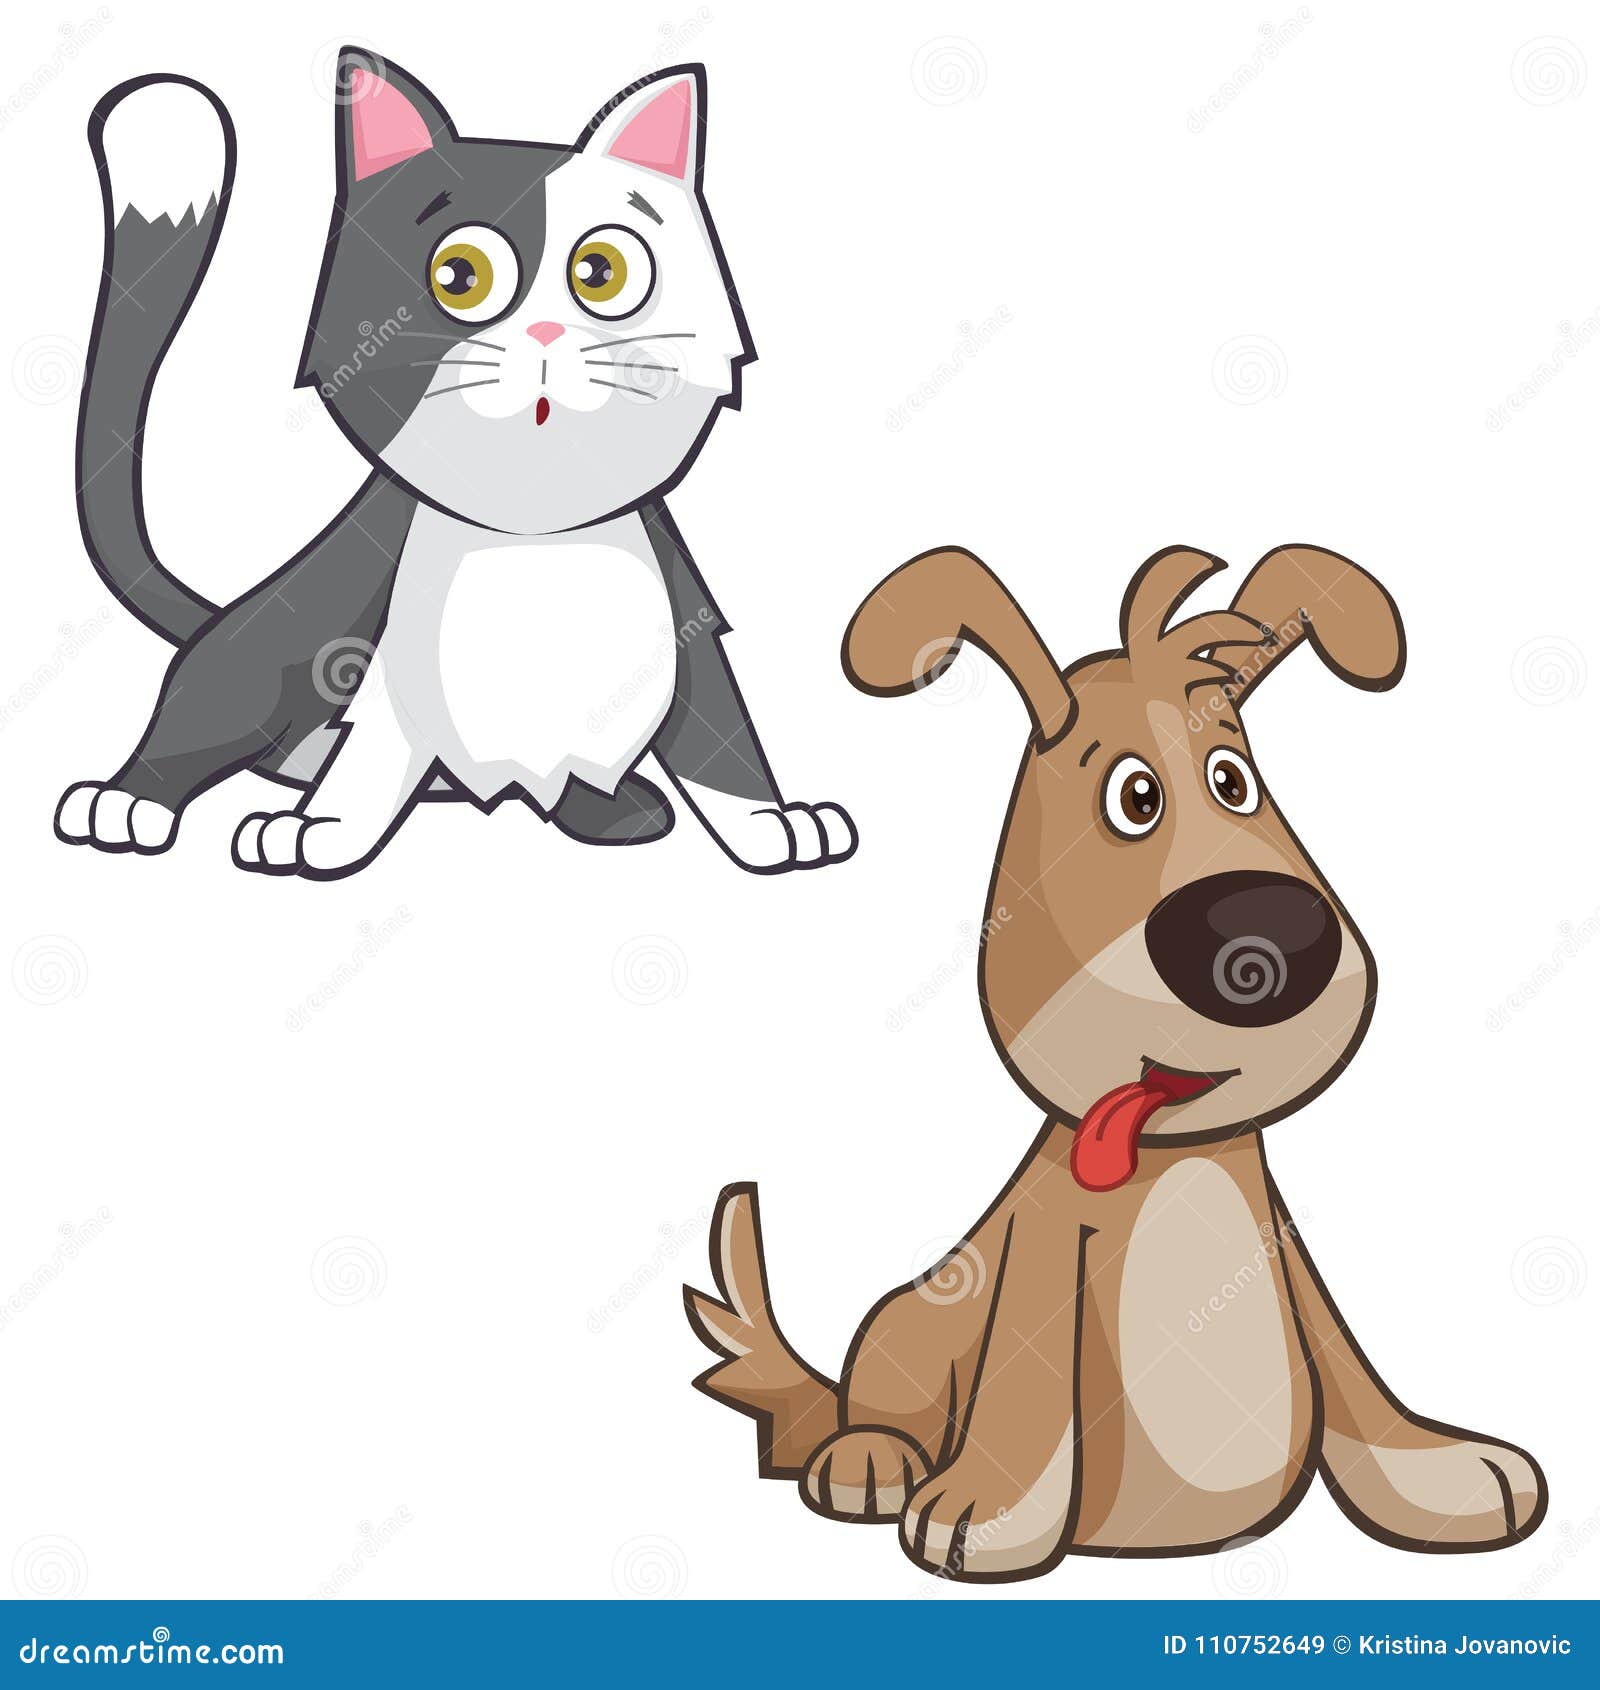 Cartoon Cat and Dog Illustrations Stock Vector - Illustration of goofy,  isolated: 110752649